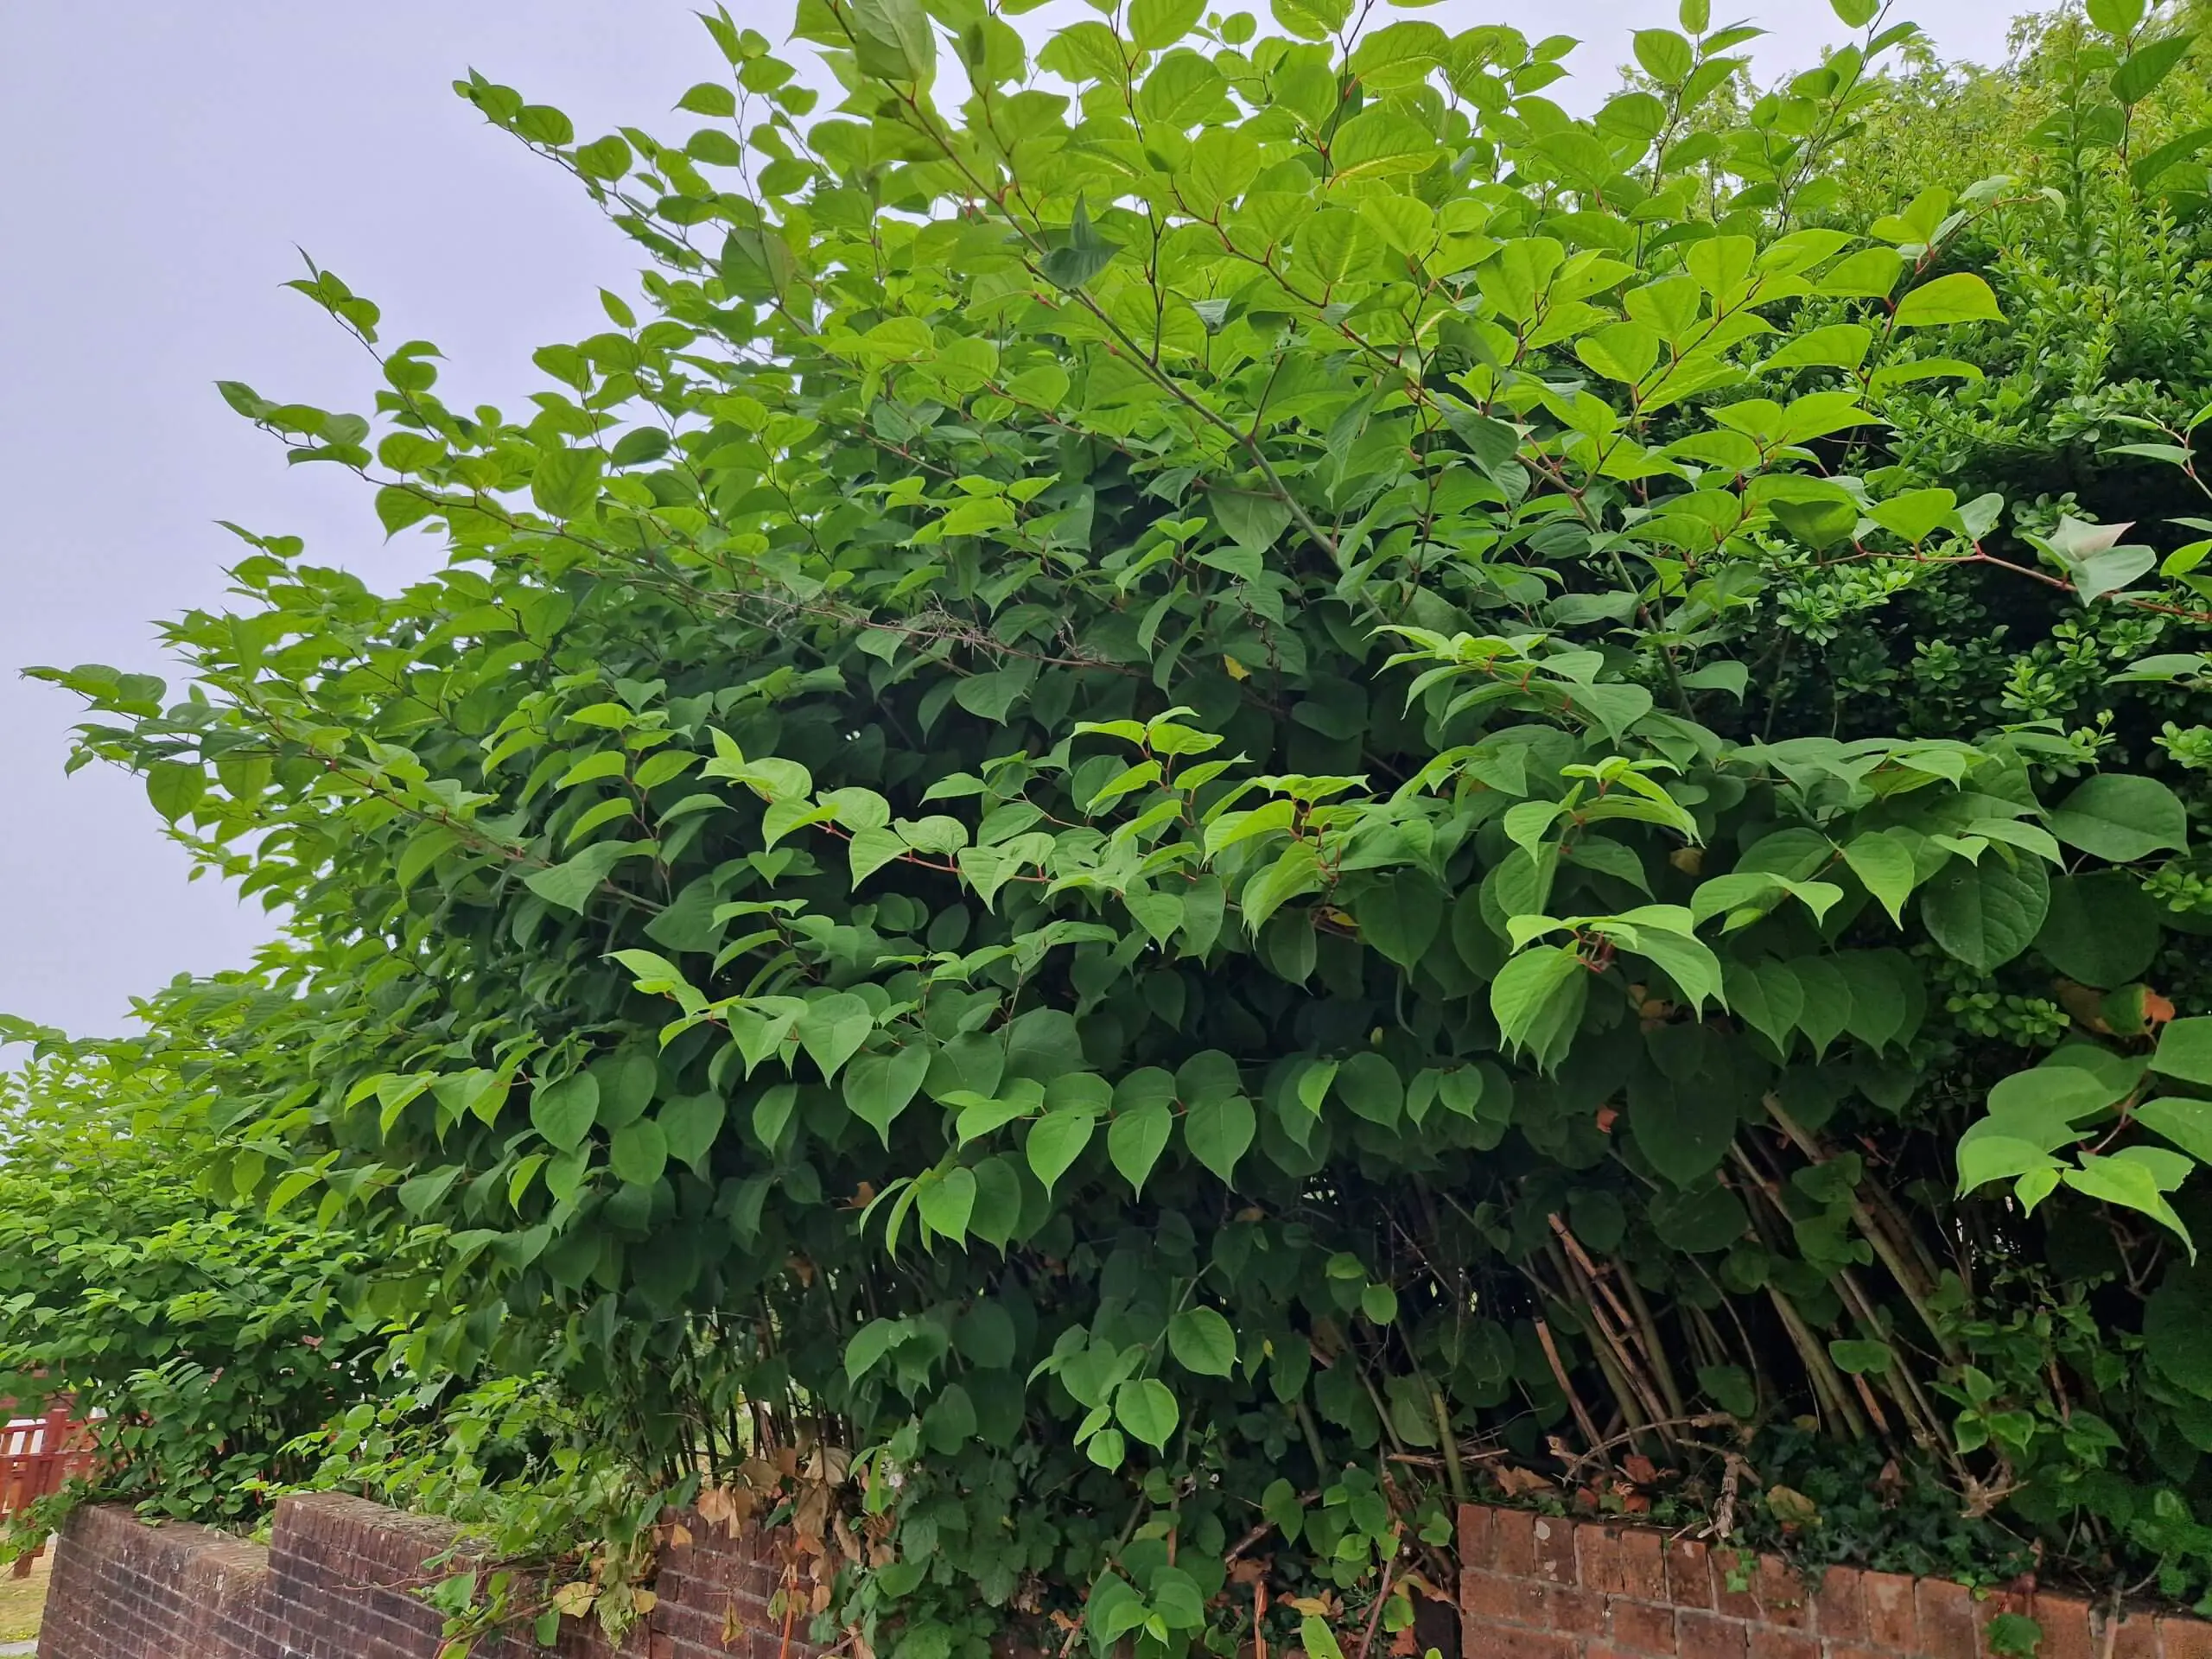 The invasive nature of Japanese knotweed costs homeowners dearly